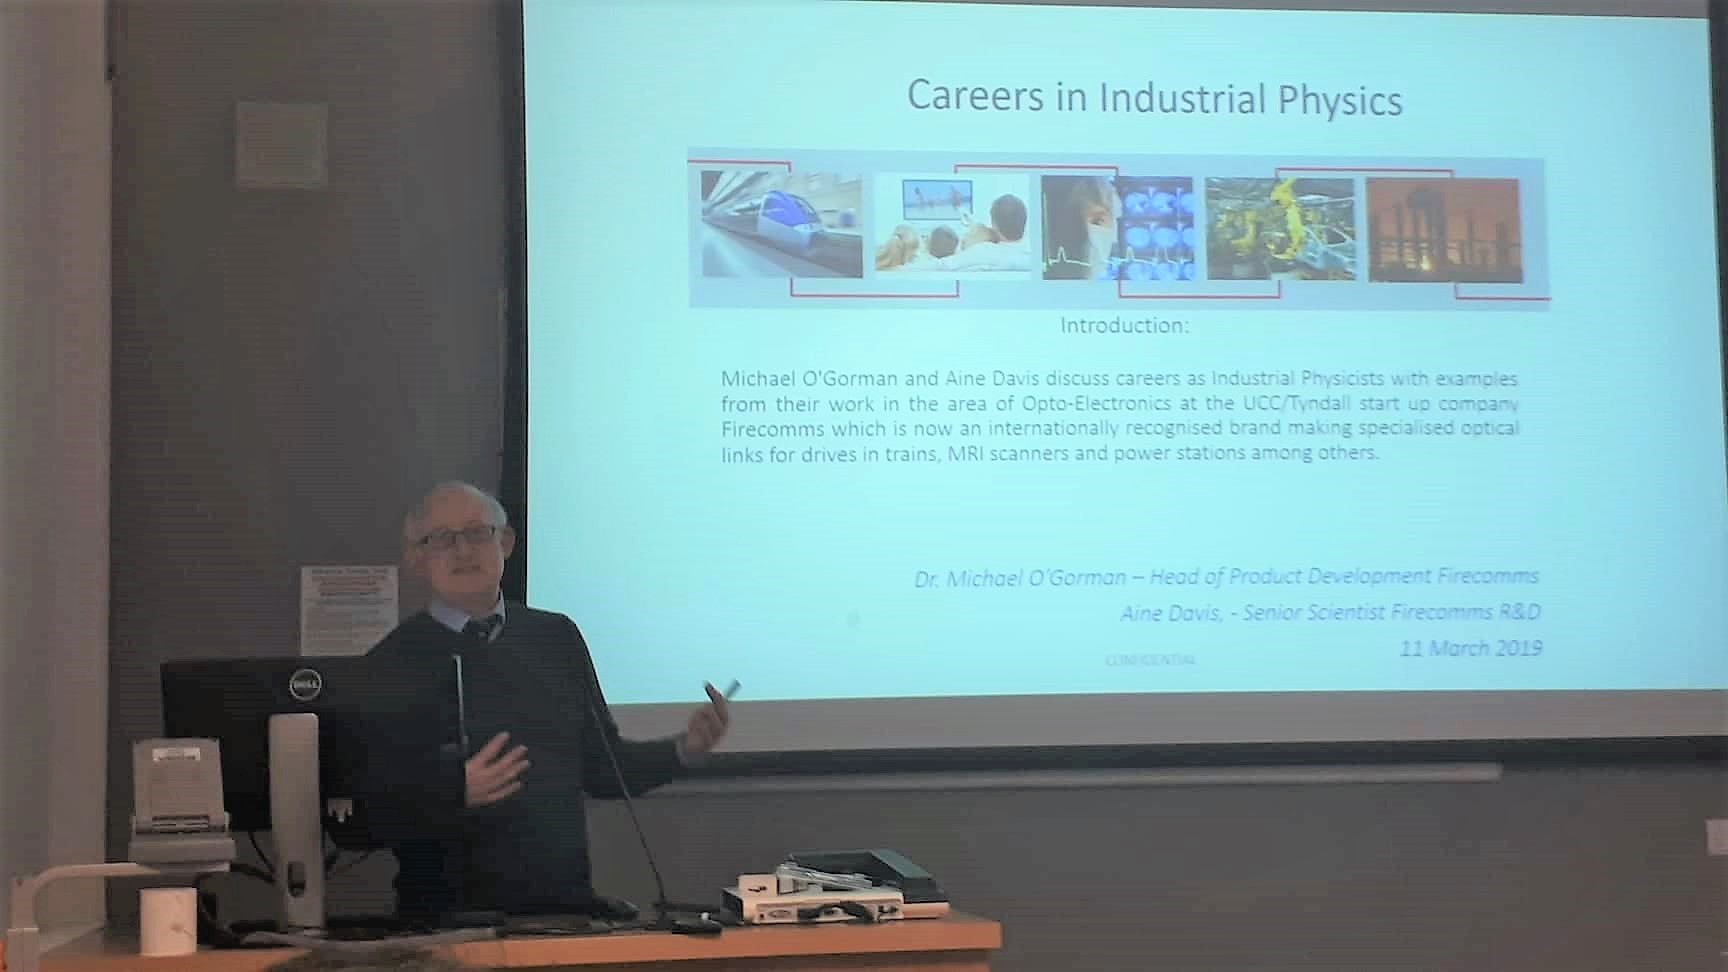 'Careers in Industrial Physics' Seminar Highlights